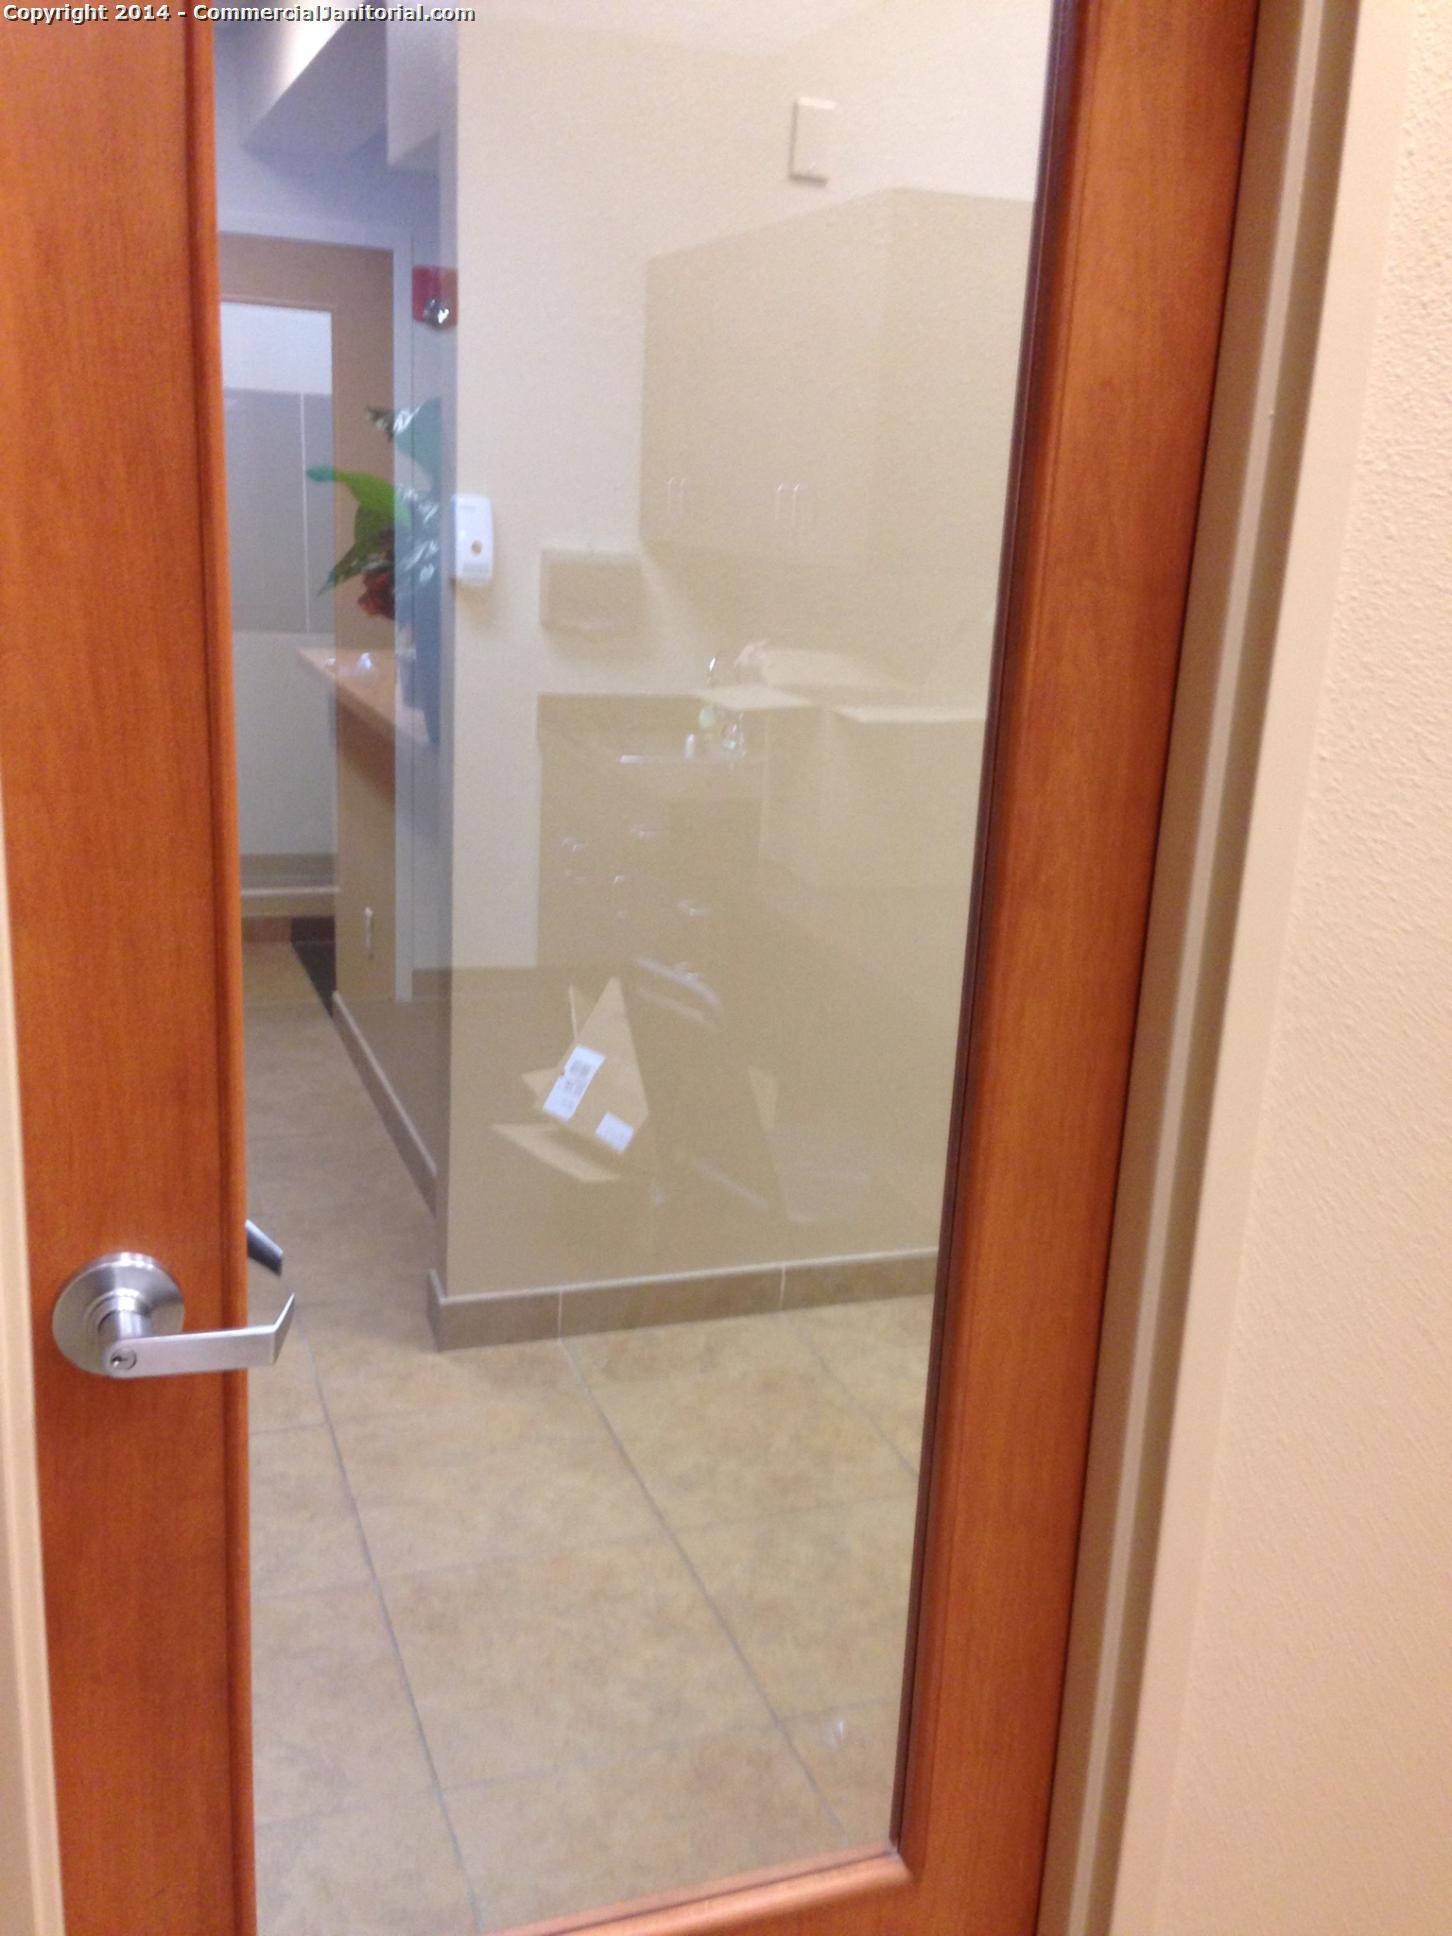 10/22/14

Laura R. performed inspection at account.

The crew did a great job of wiping interior glass and door frames.

Client will be super happy.

Nice work team!

Laura R.